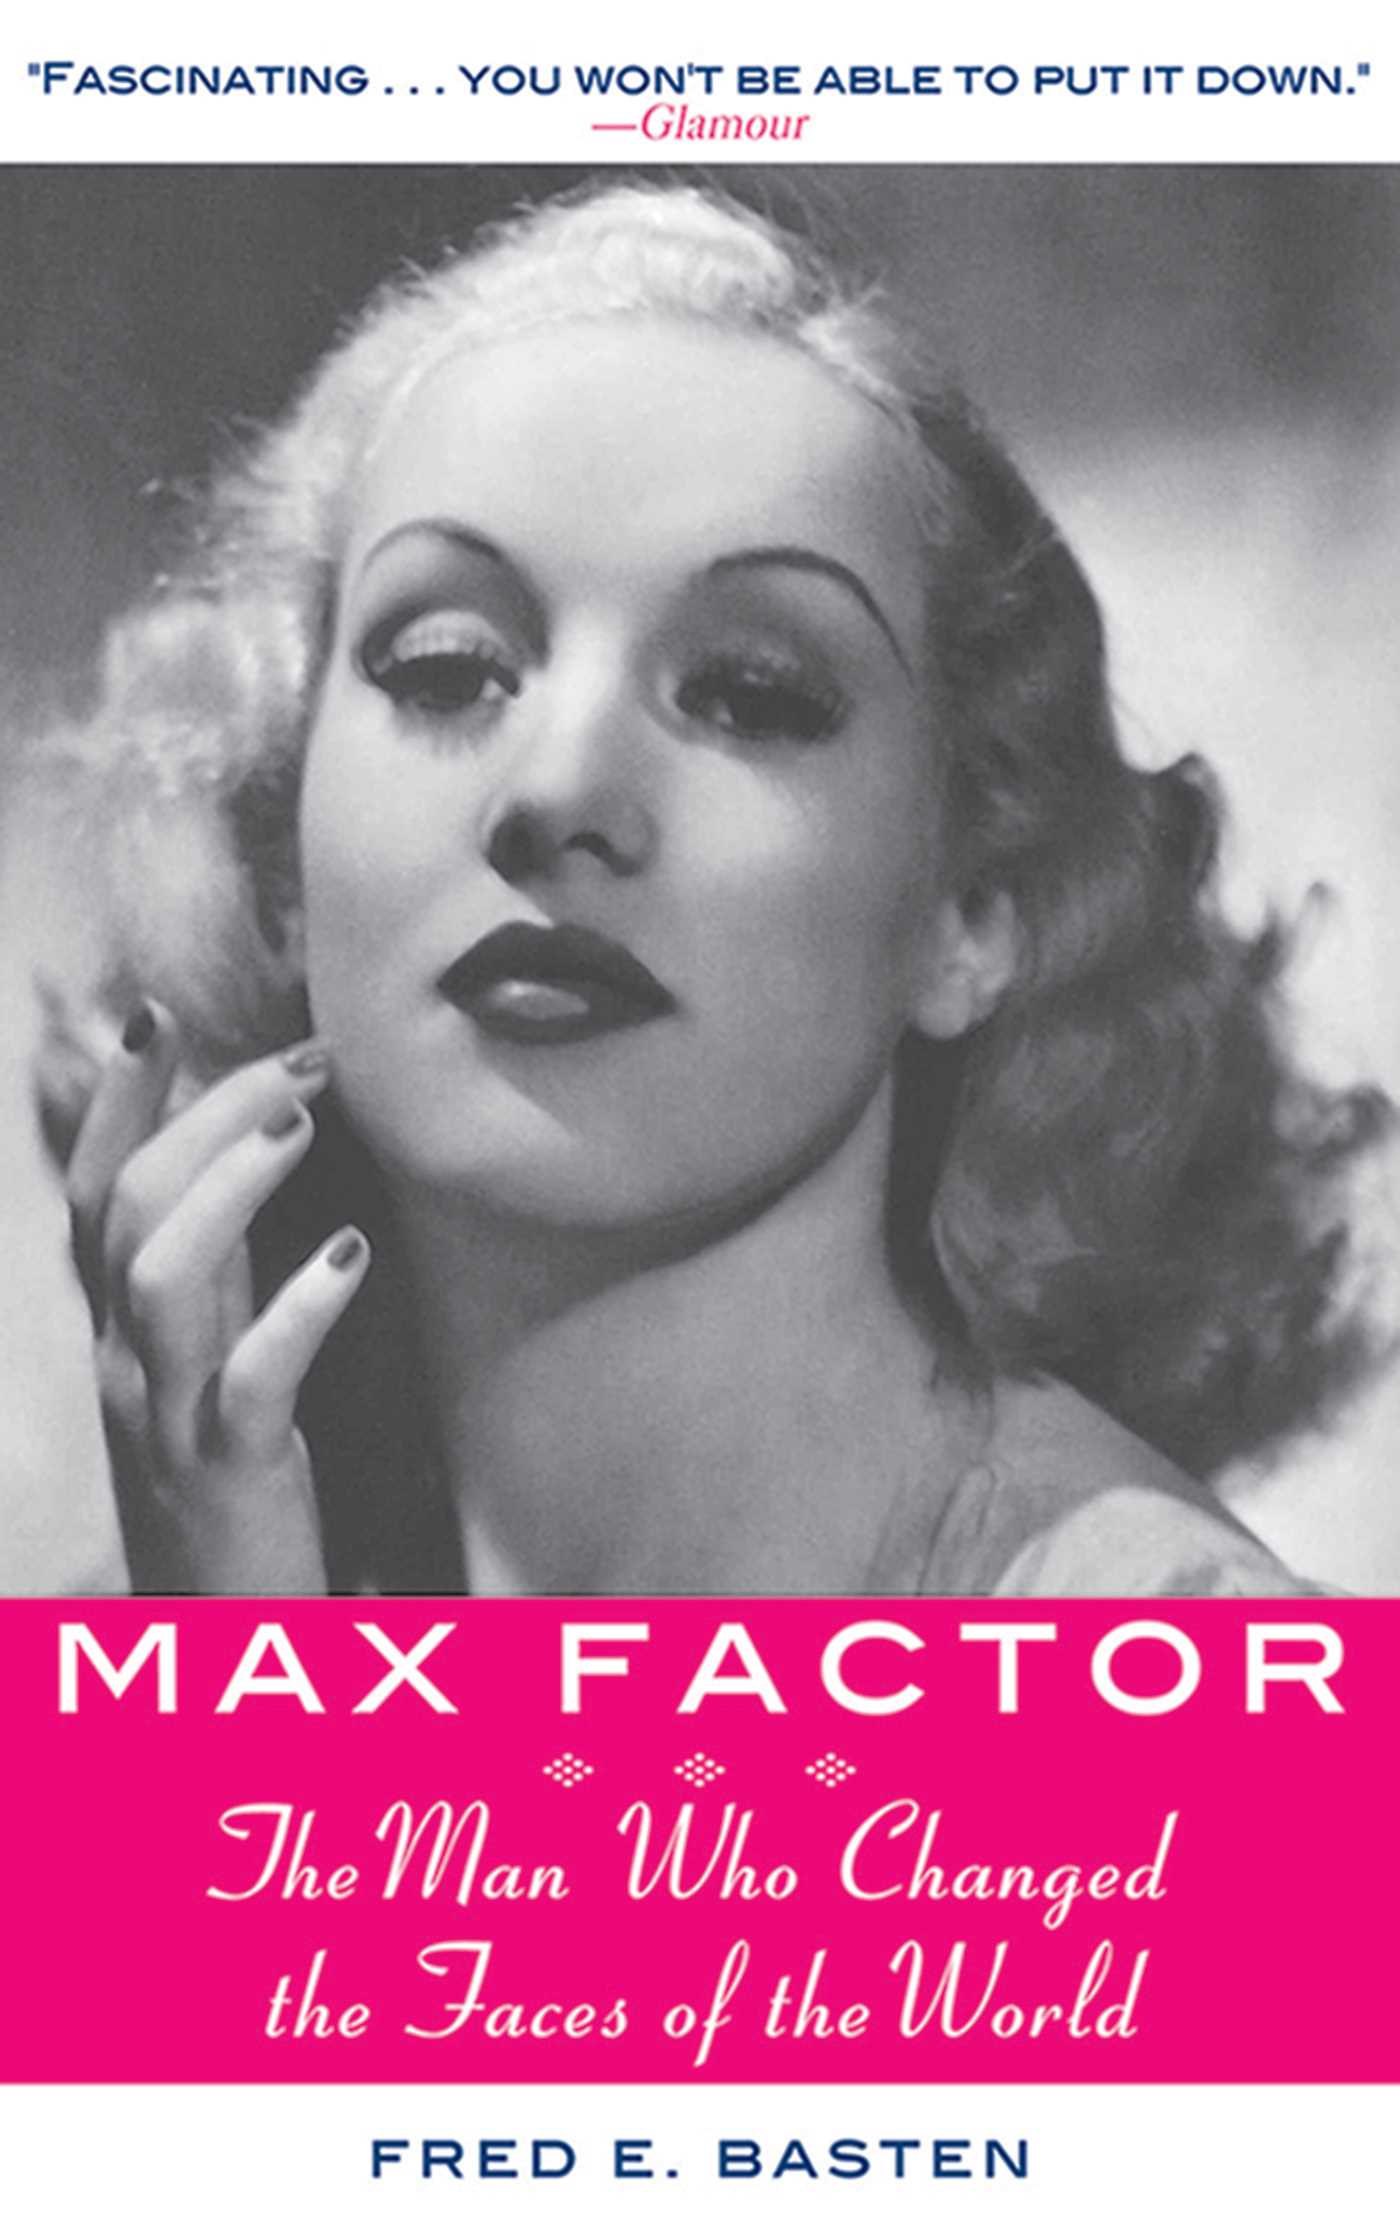 Max Factor: The Man Who Changed the Faces of the World Fred E. Basten Author